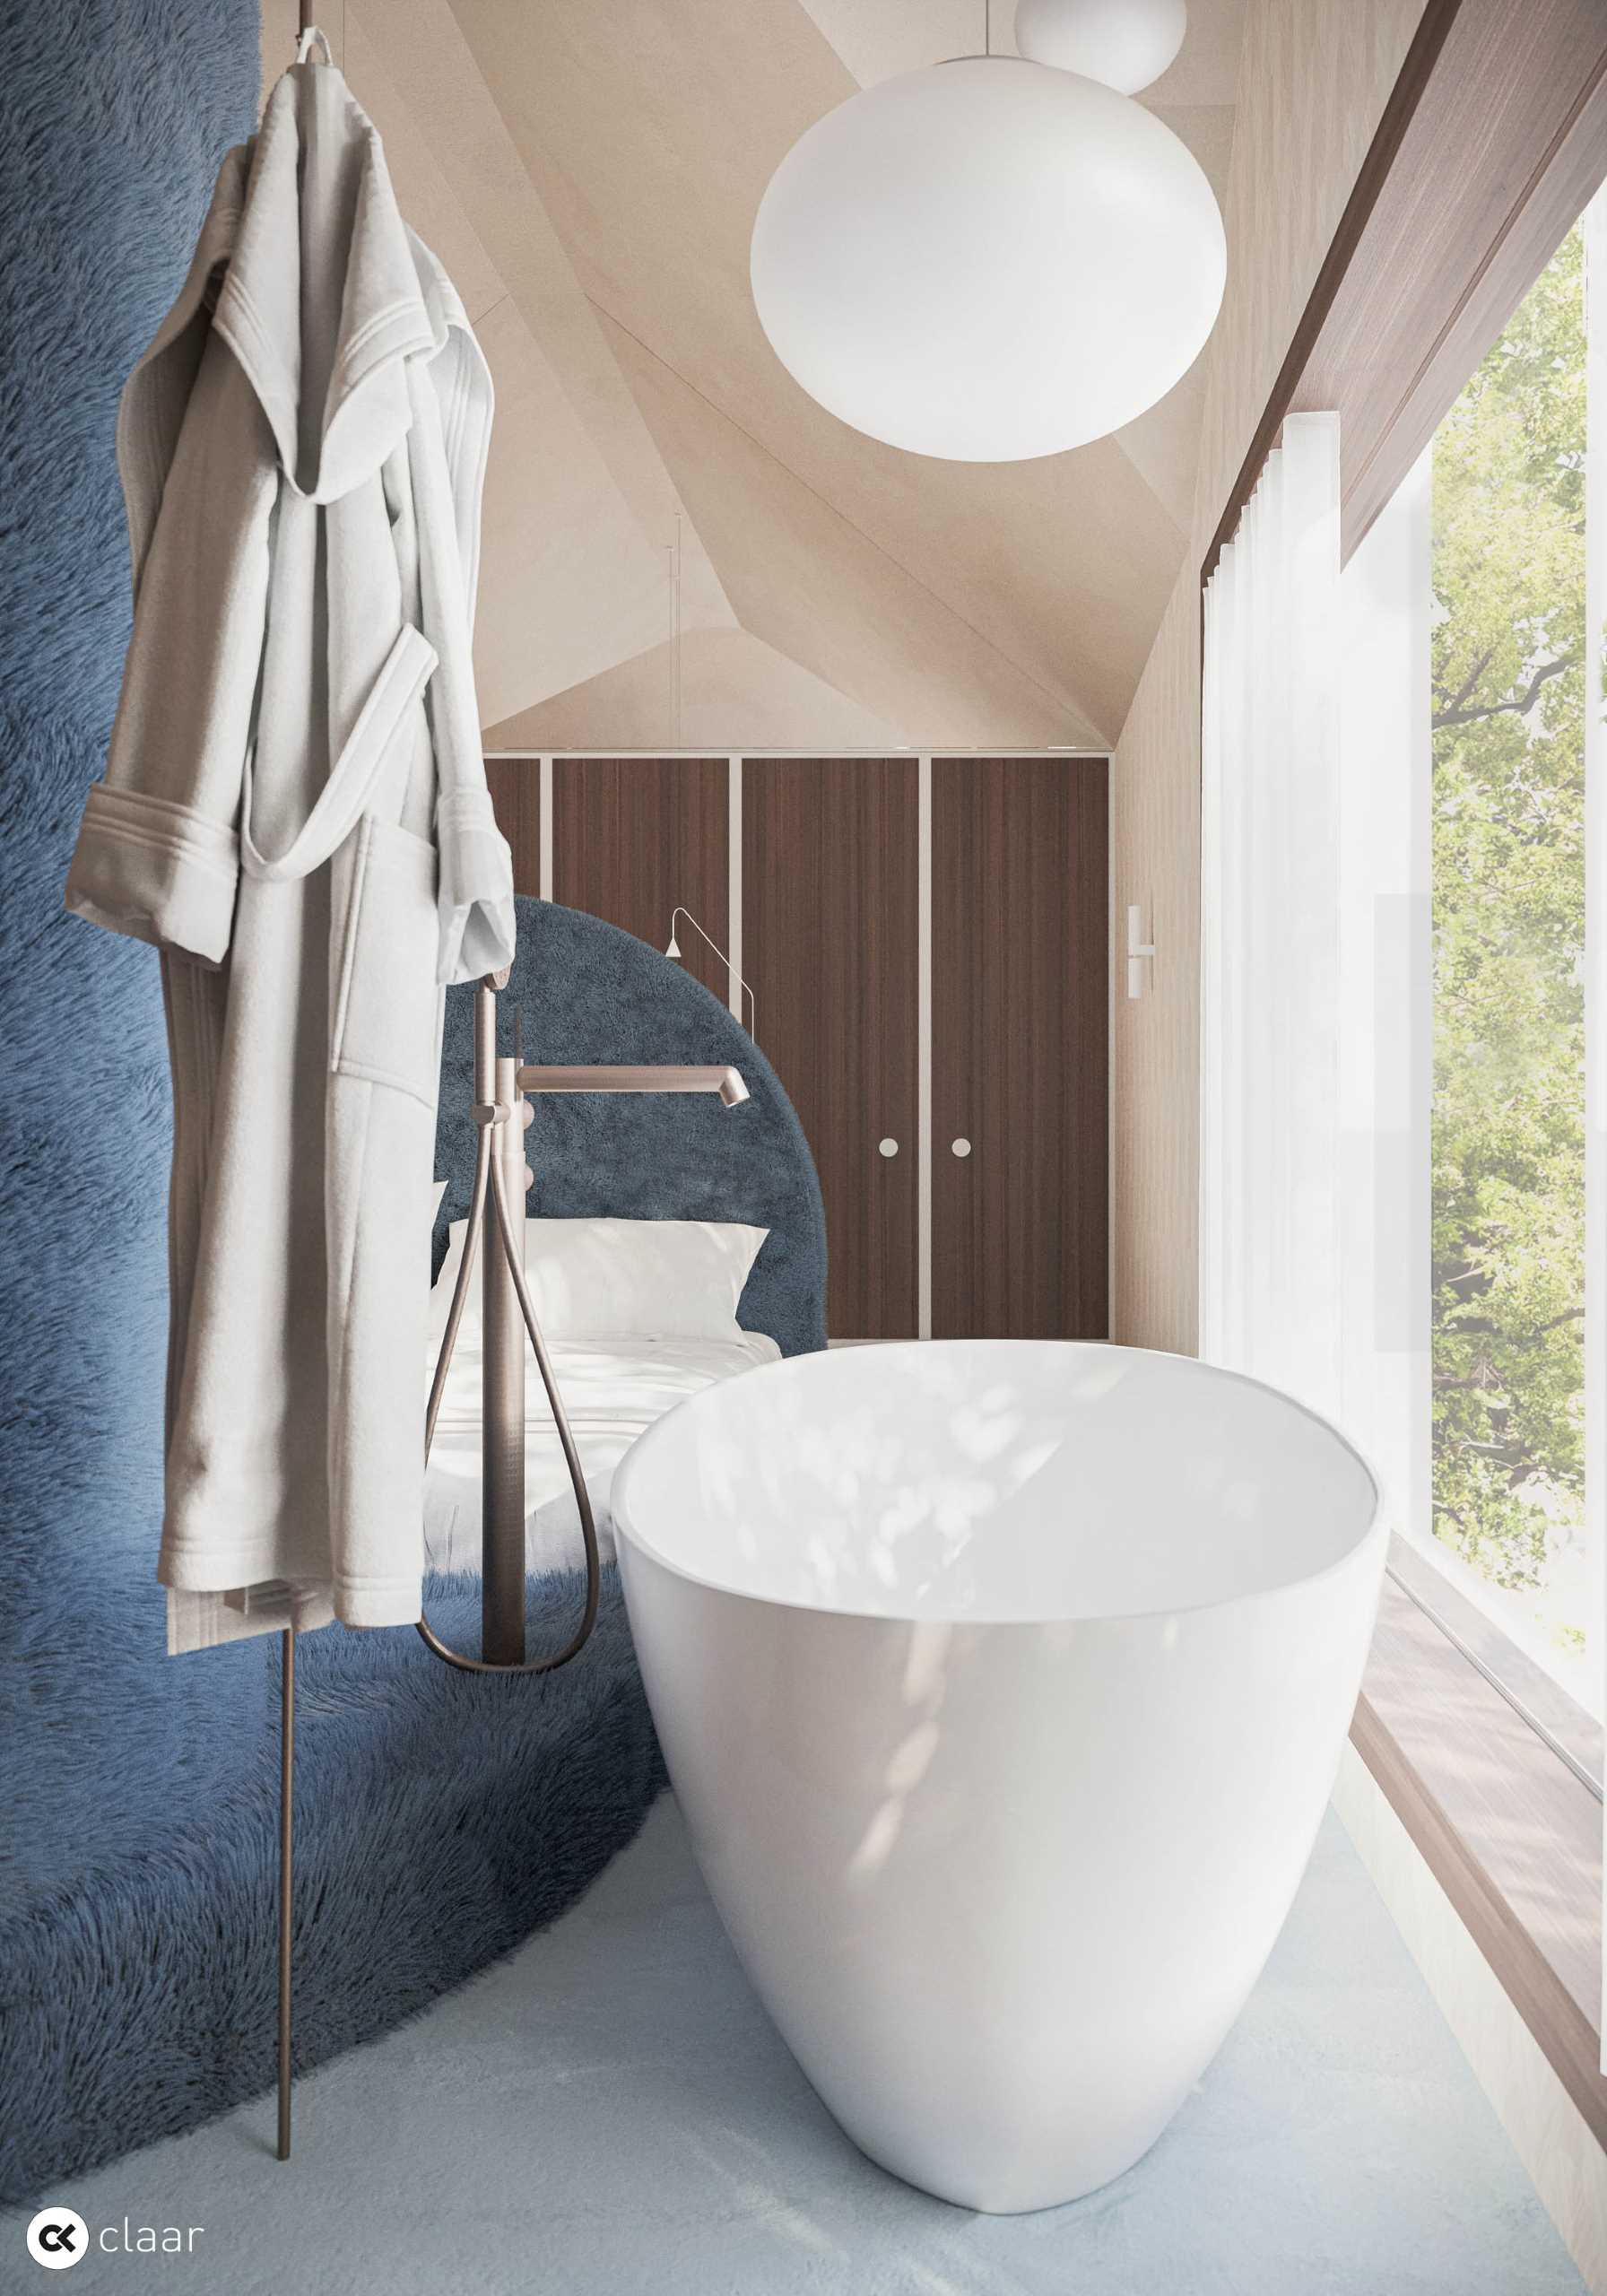 A hotel-inspired bedroom and bathroom suite with a circular shower, freestanding bathtub, double vanity, and lots of storage.